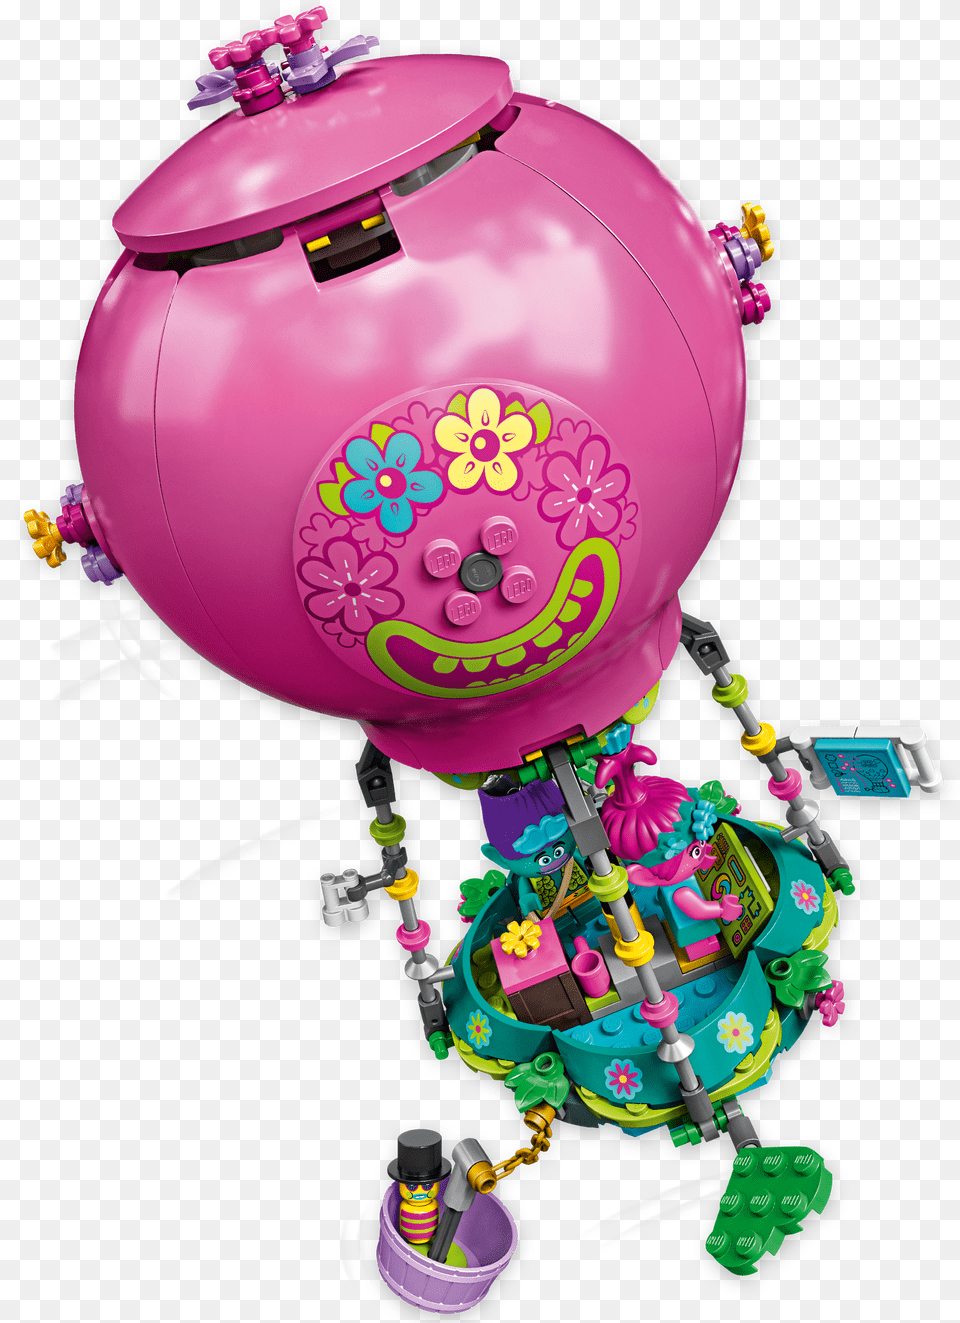 Lego Trolls Poppyquots Hot Air Balloon Adventure, Toy Free Transparent Png